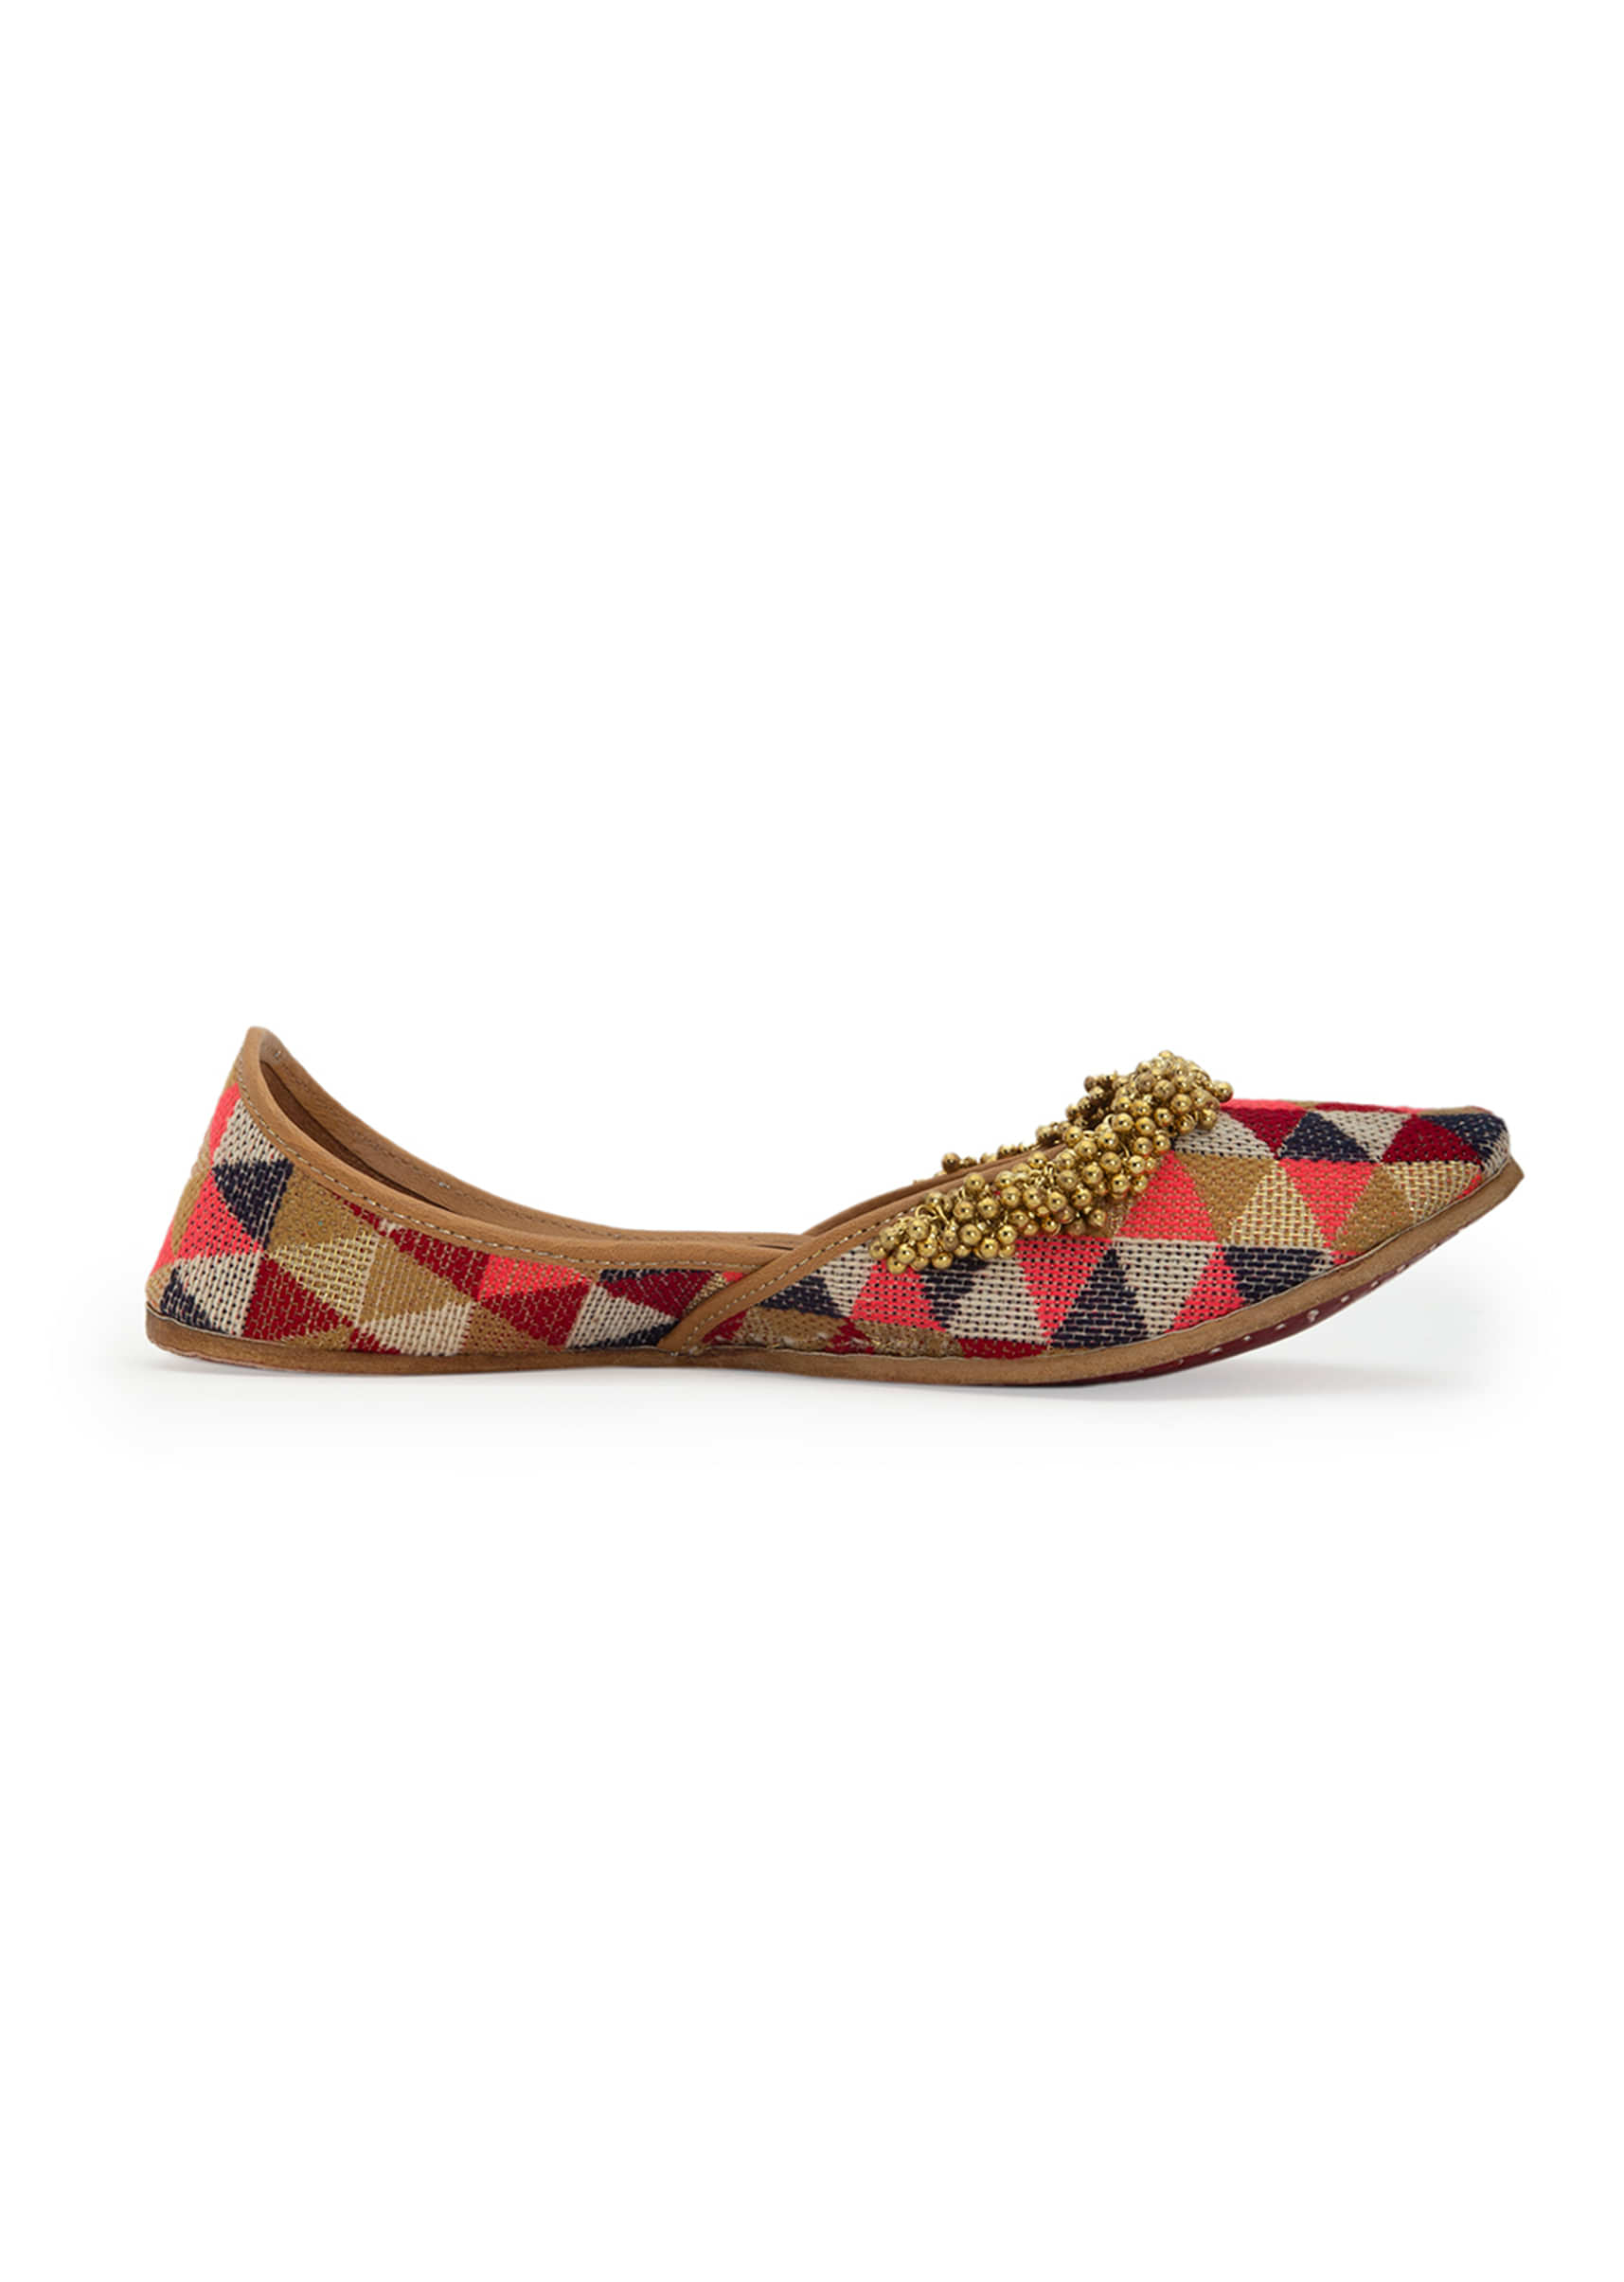 Multi Colored Juttis In Geometric Printed Jacquard With Tiny Ghungroos By 5 Elements